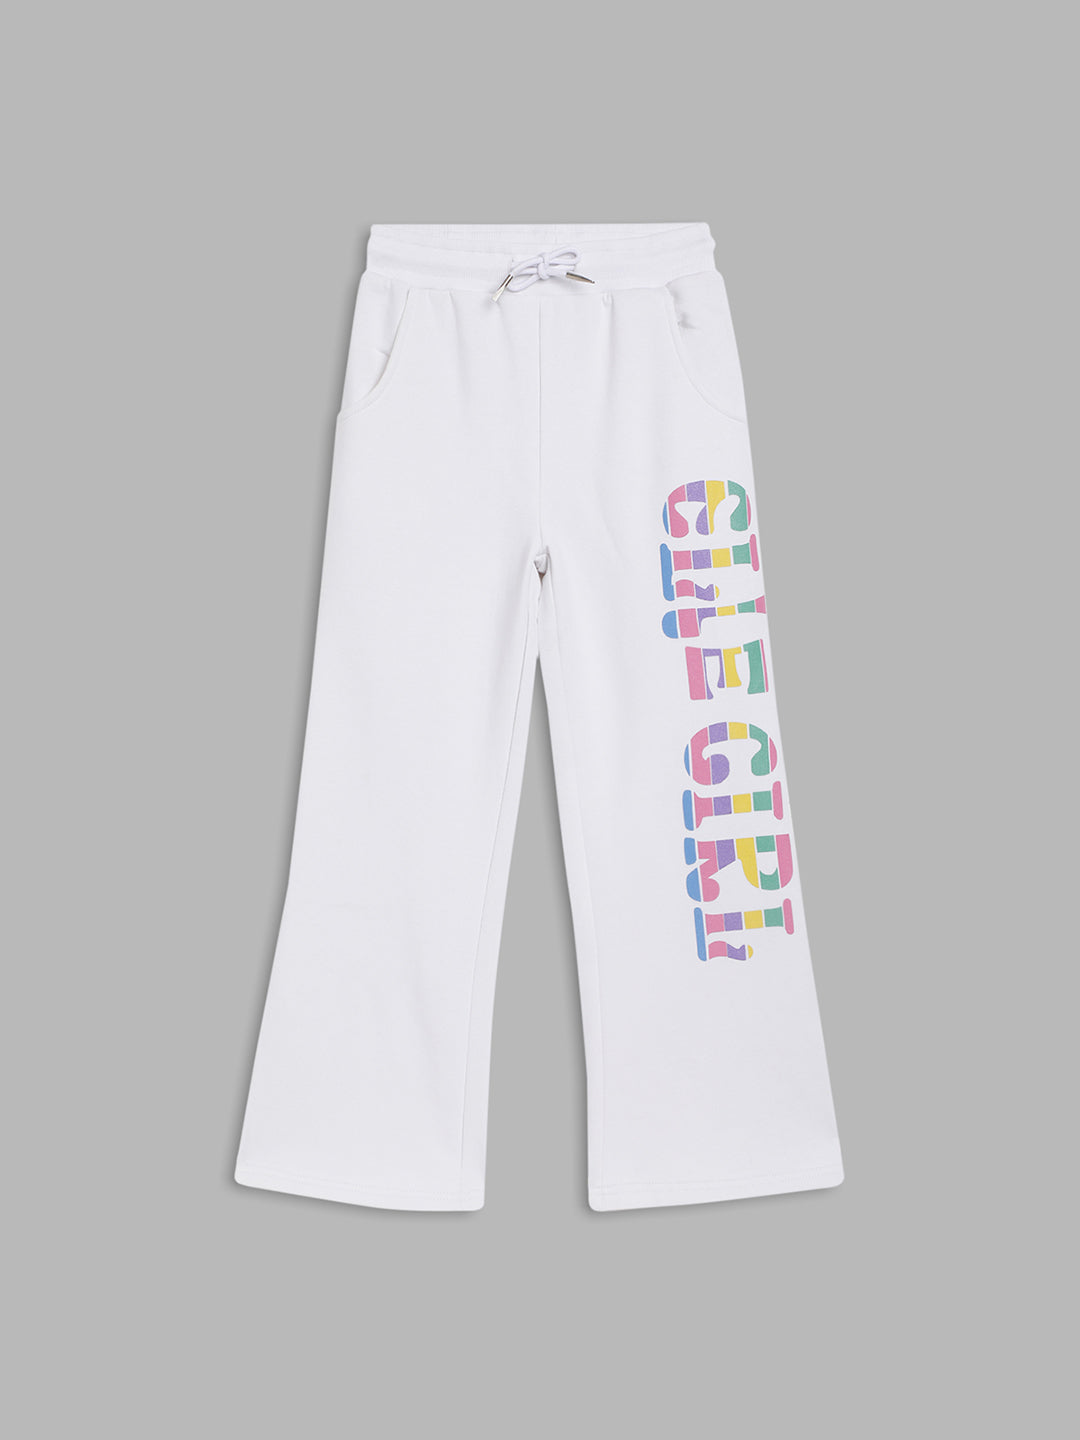 Skinny Stretchable Girls White Jeans at best price in Delhi | ID:  15936239962